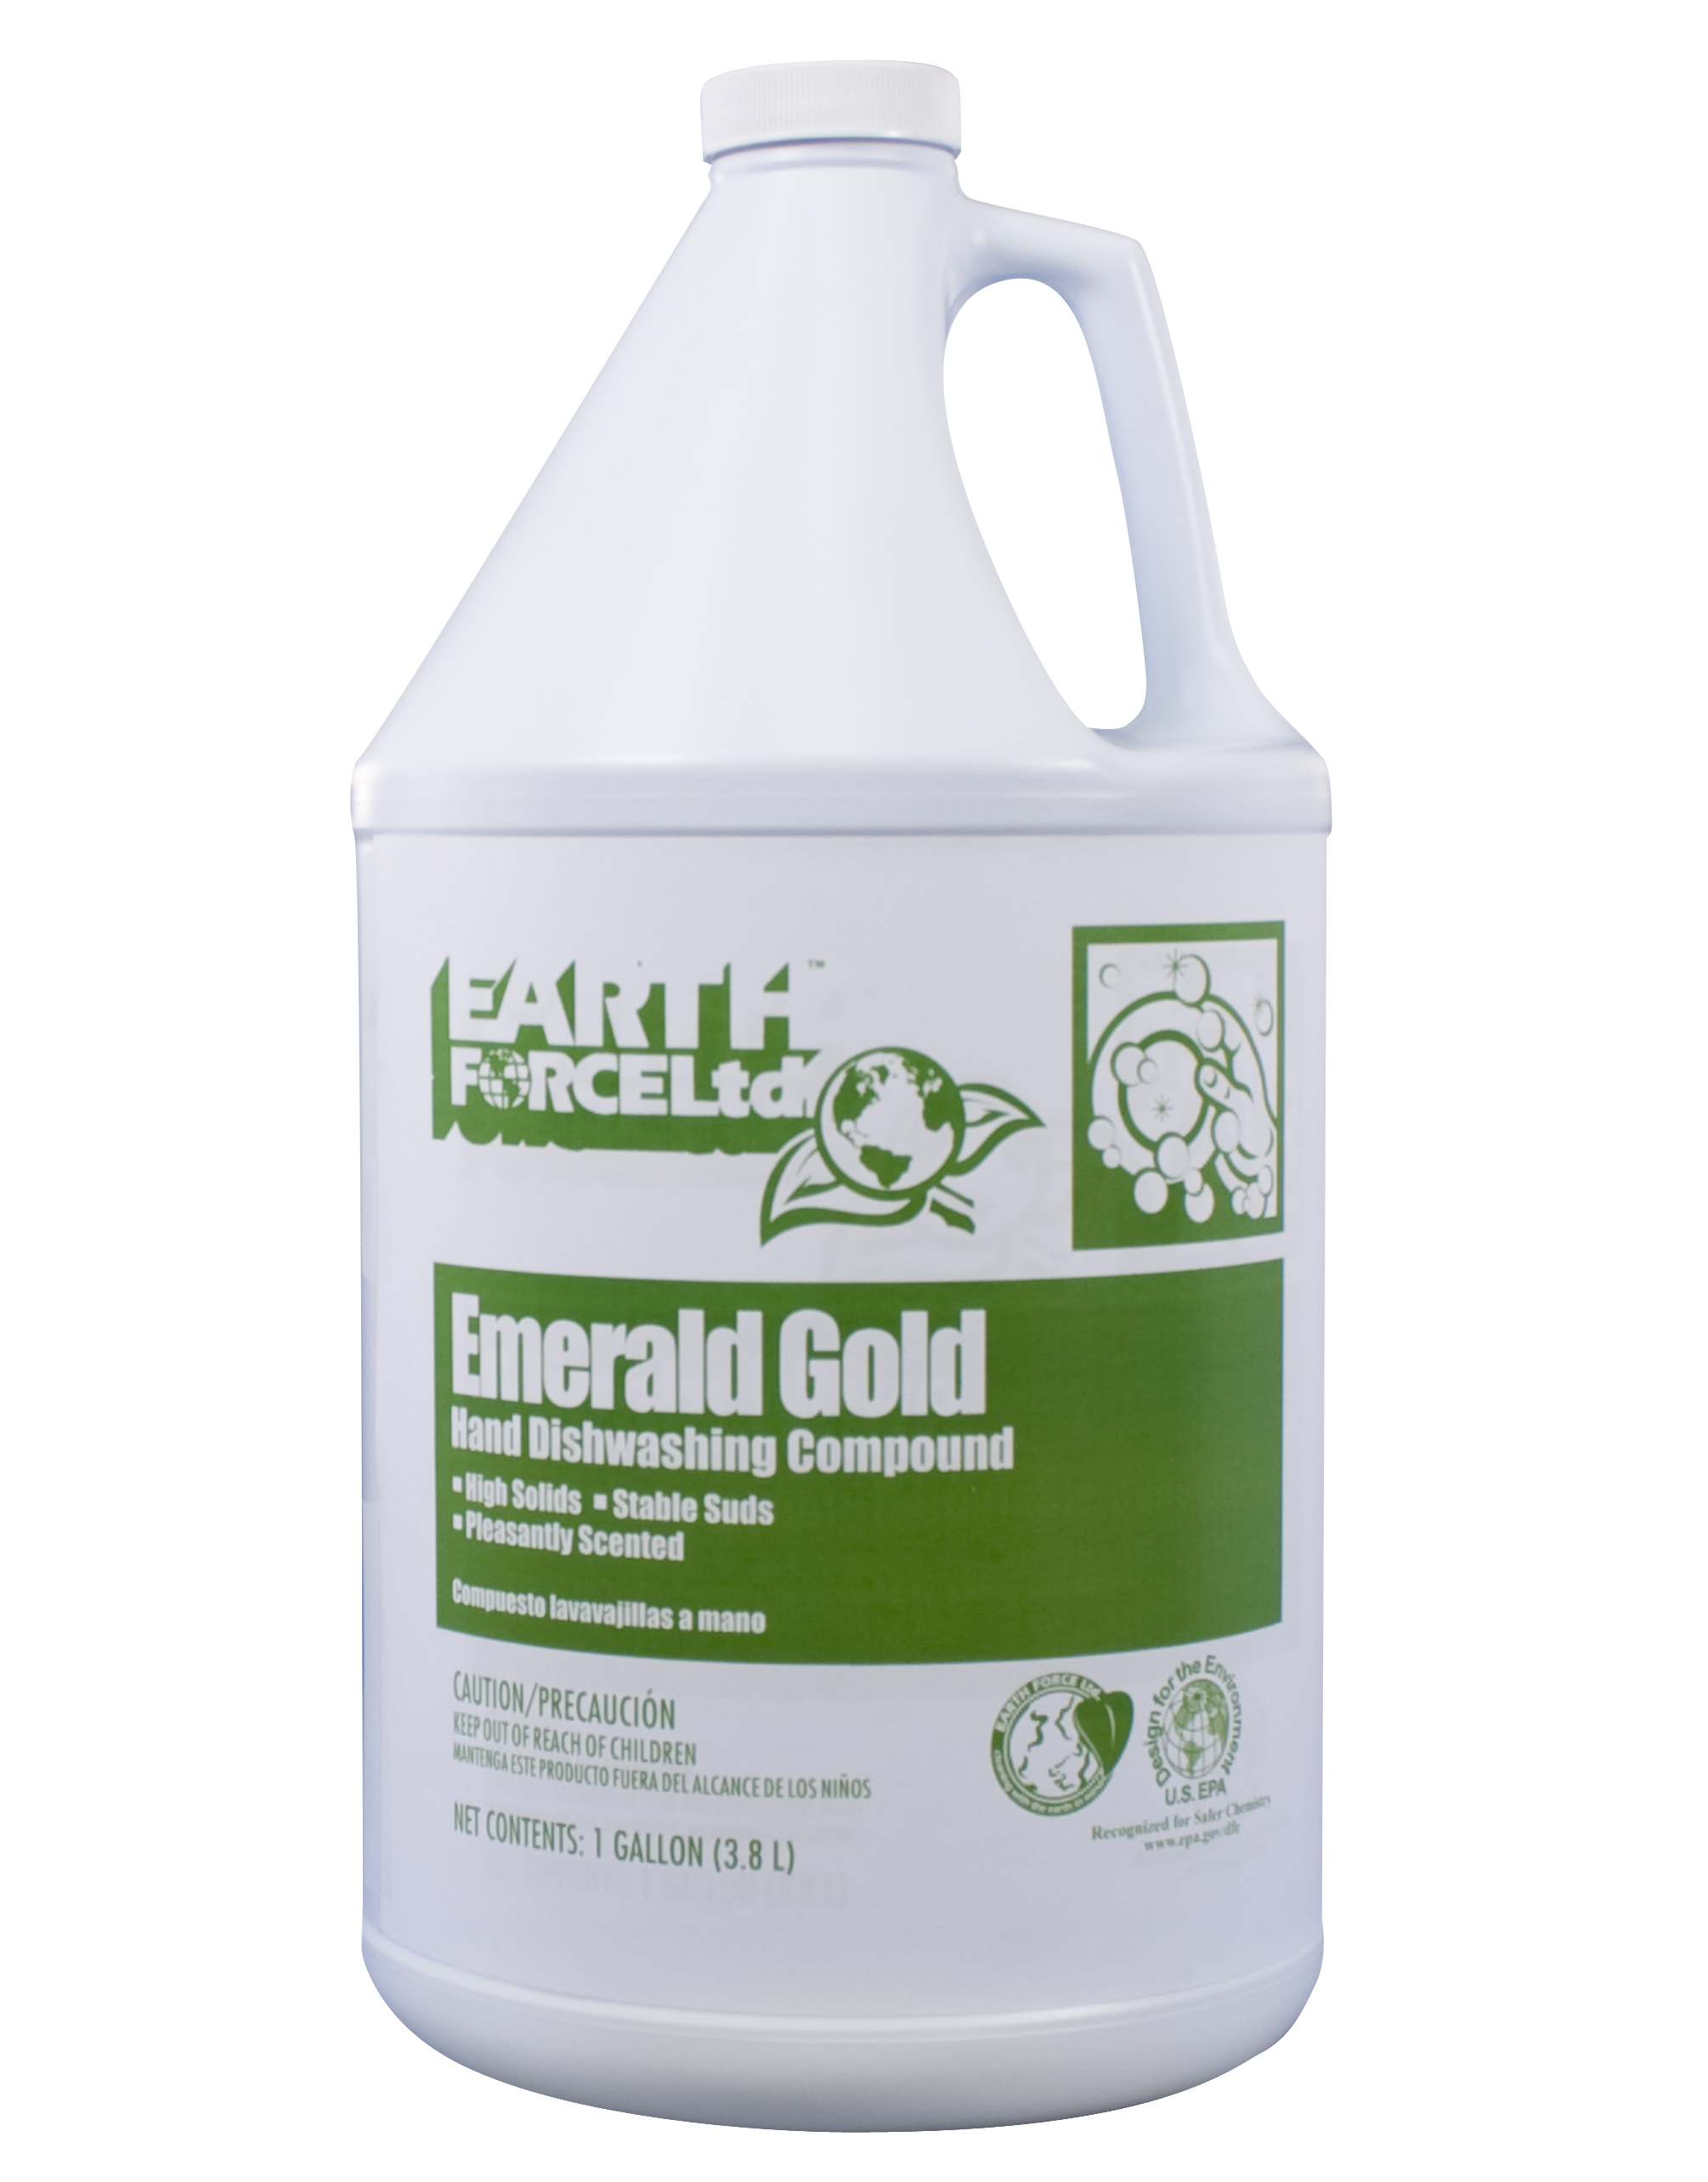 EMERALD GOLD HAND DISHWASHING
DETERGENT 4/1 GALLON &quot;EARTH
FORCE&quot; 